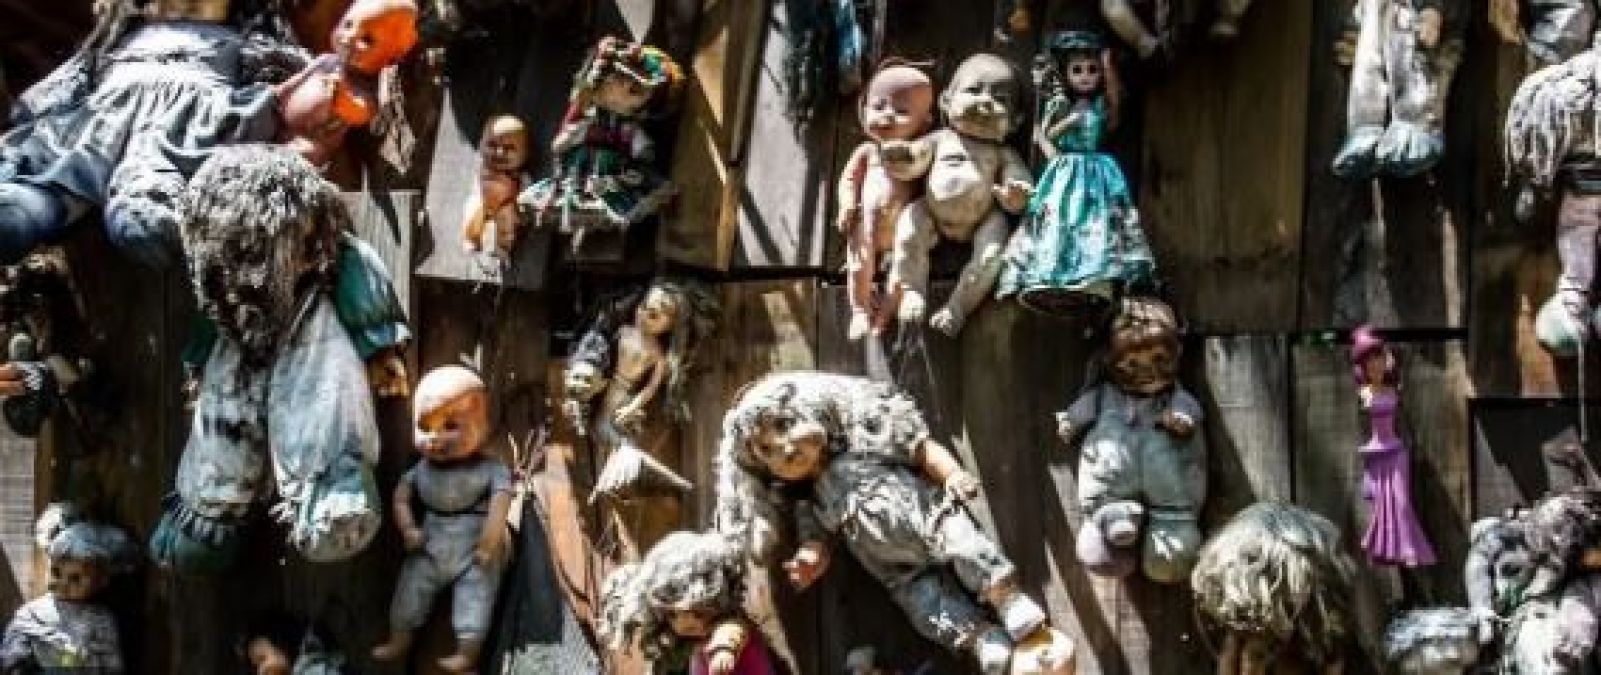 Story of the  Haunted  Islands of Dolls in Mexico